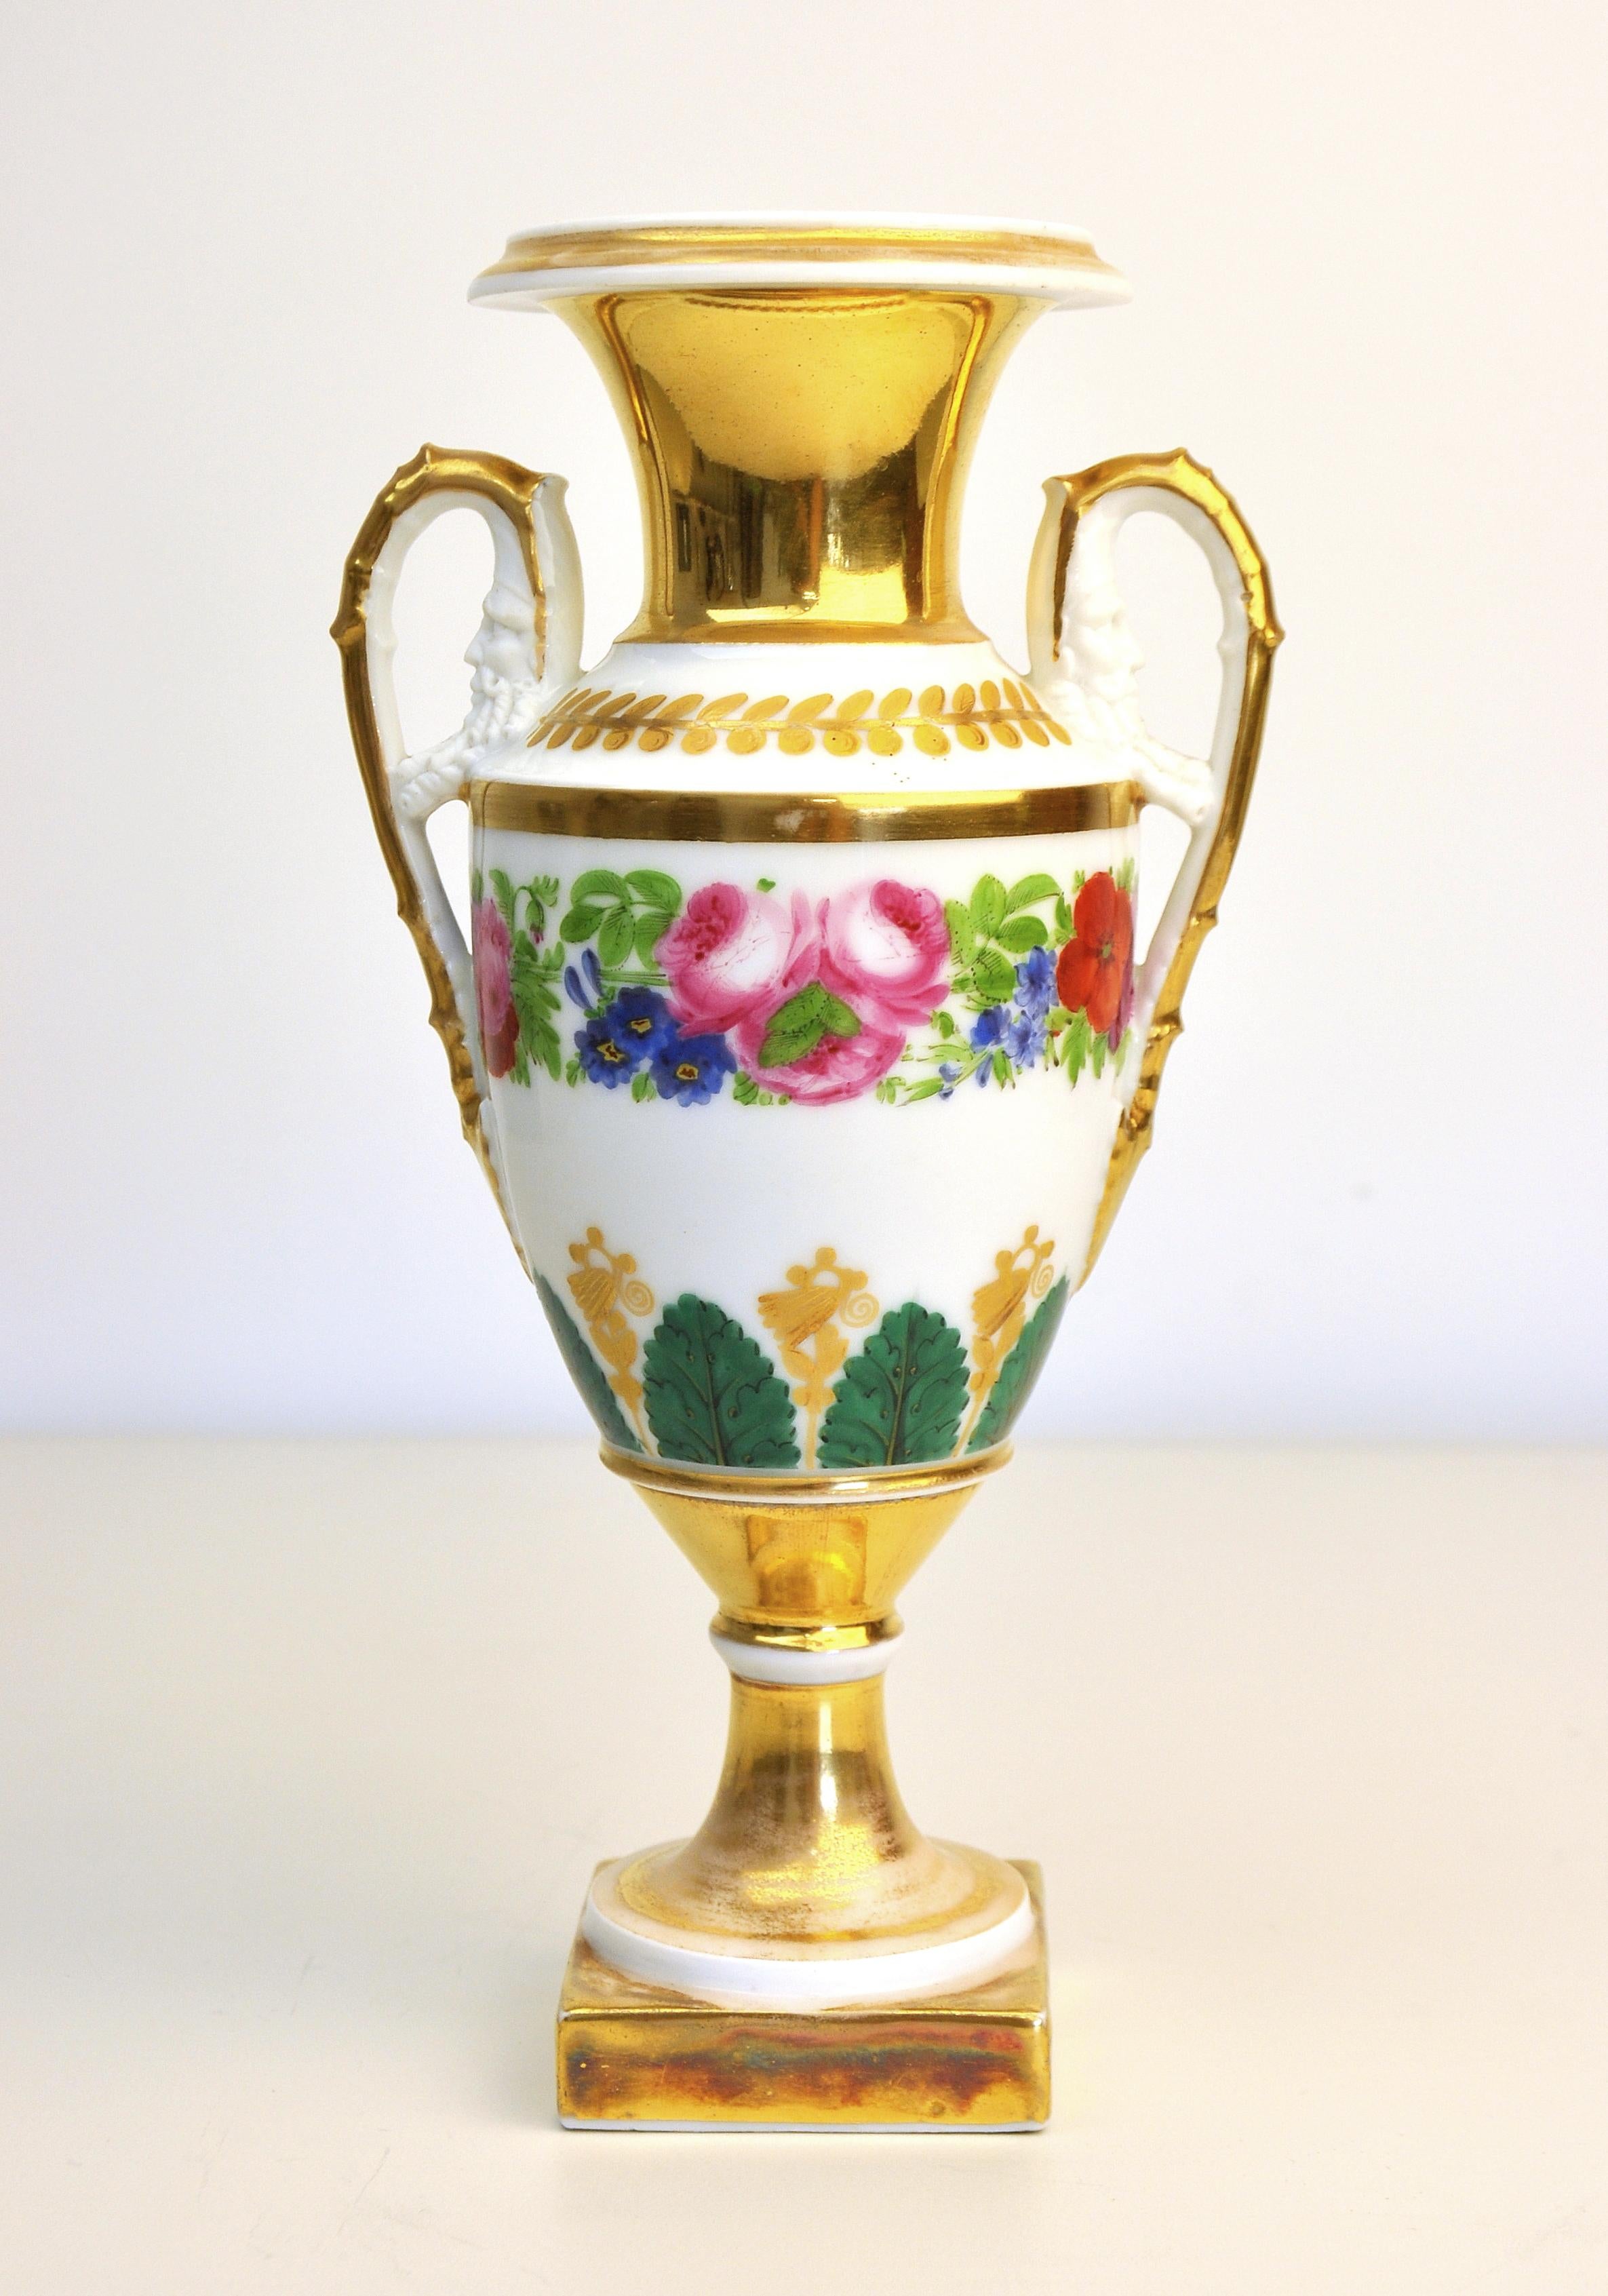 A fine and early Old Paris porcelain urn, dating from the late 18th-early 19th century. The partially gilt vase is abundantly hand painted with floral bouquets and acanthus leaves. It features a highly detailed mascherone under the gilt handles. A